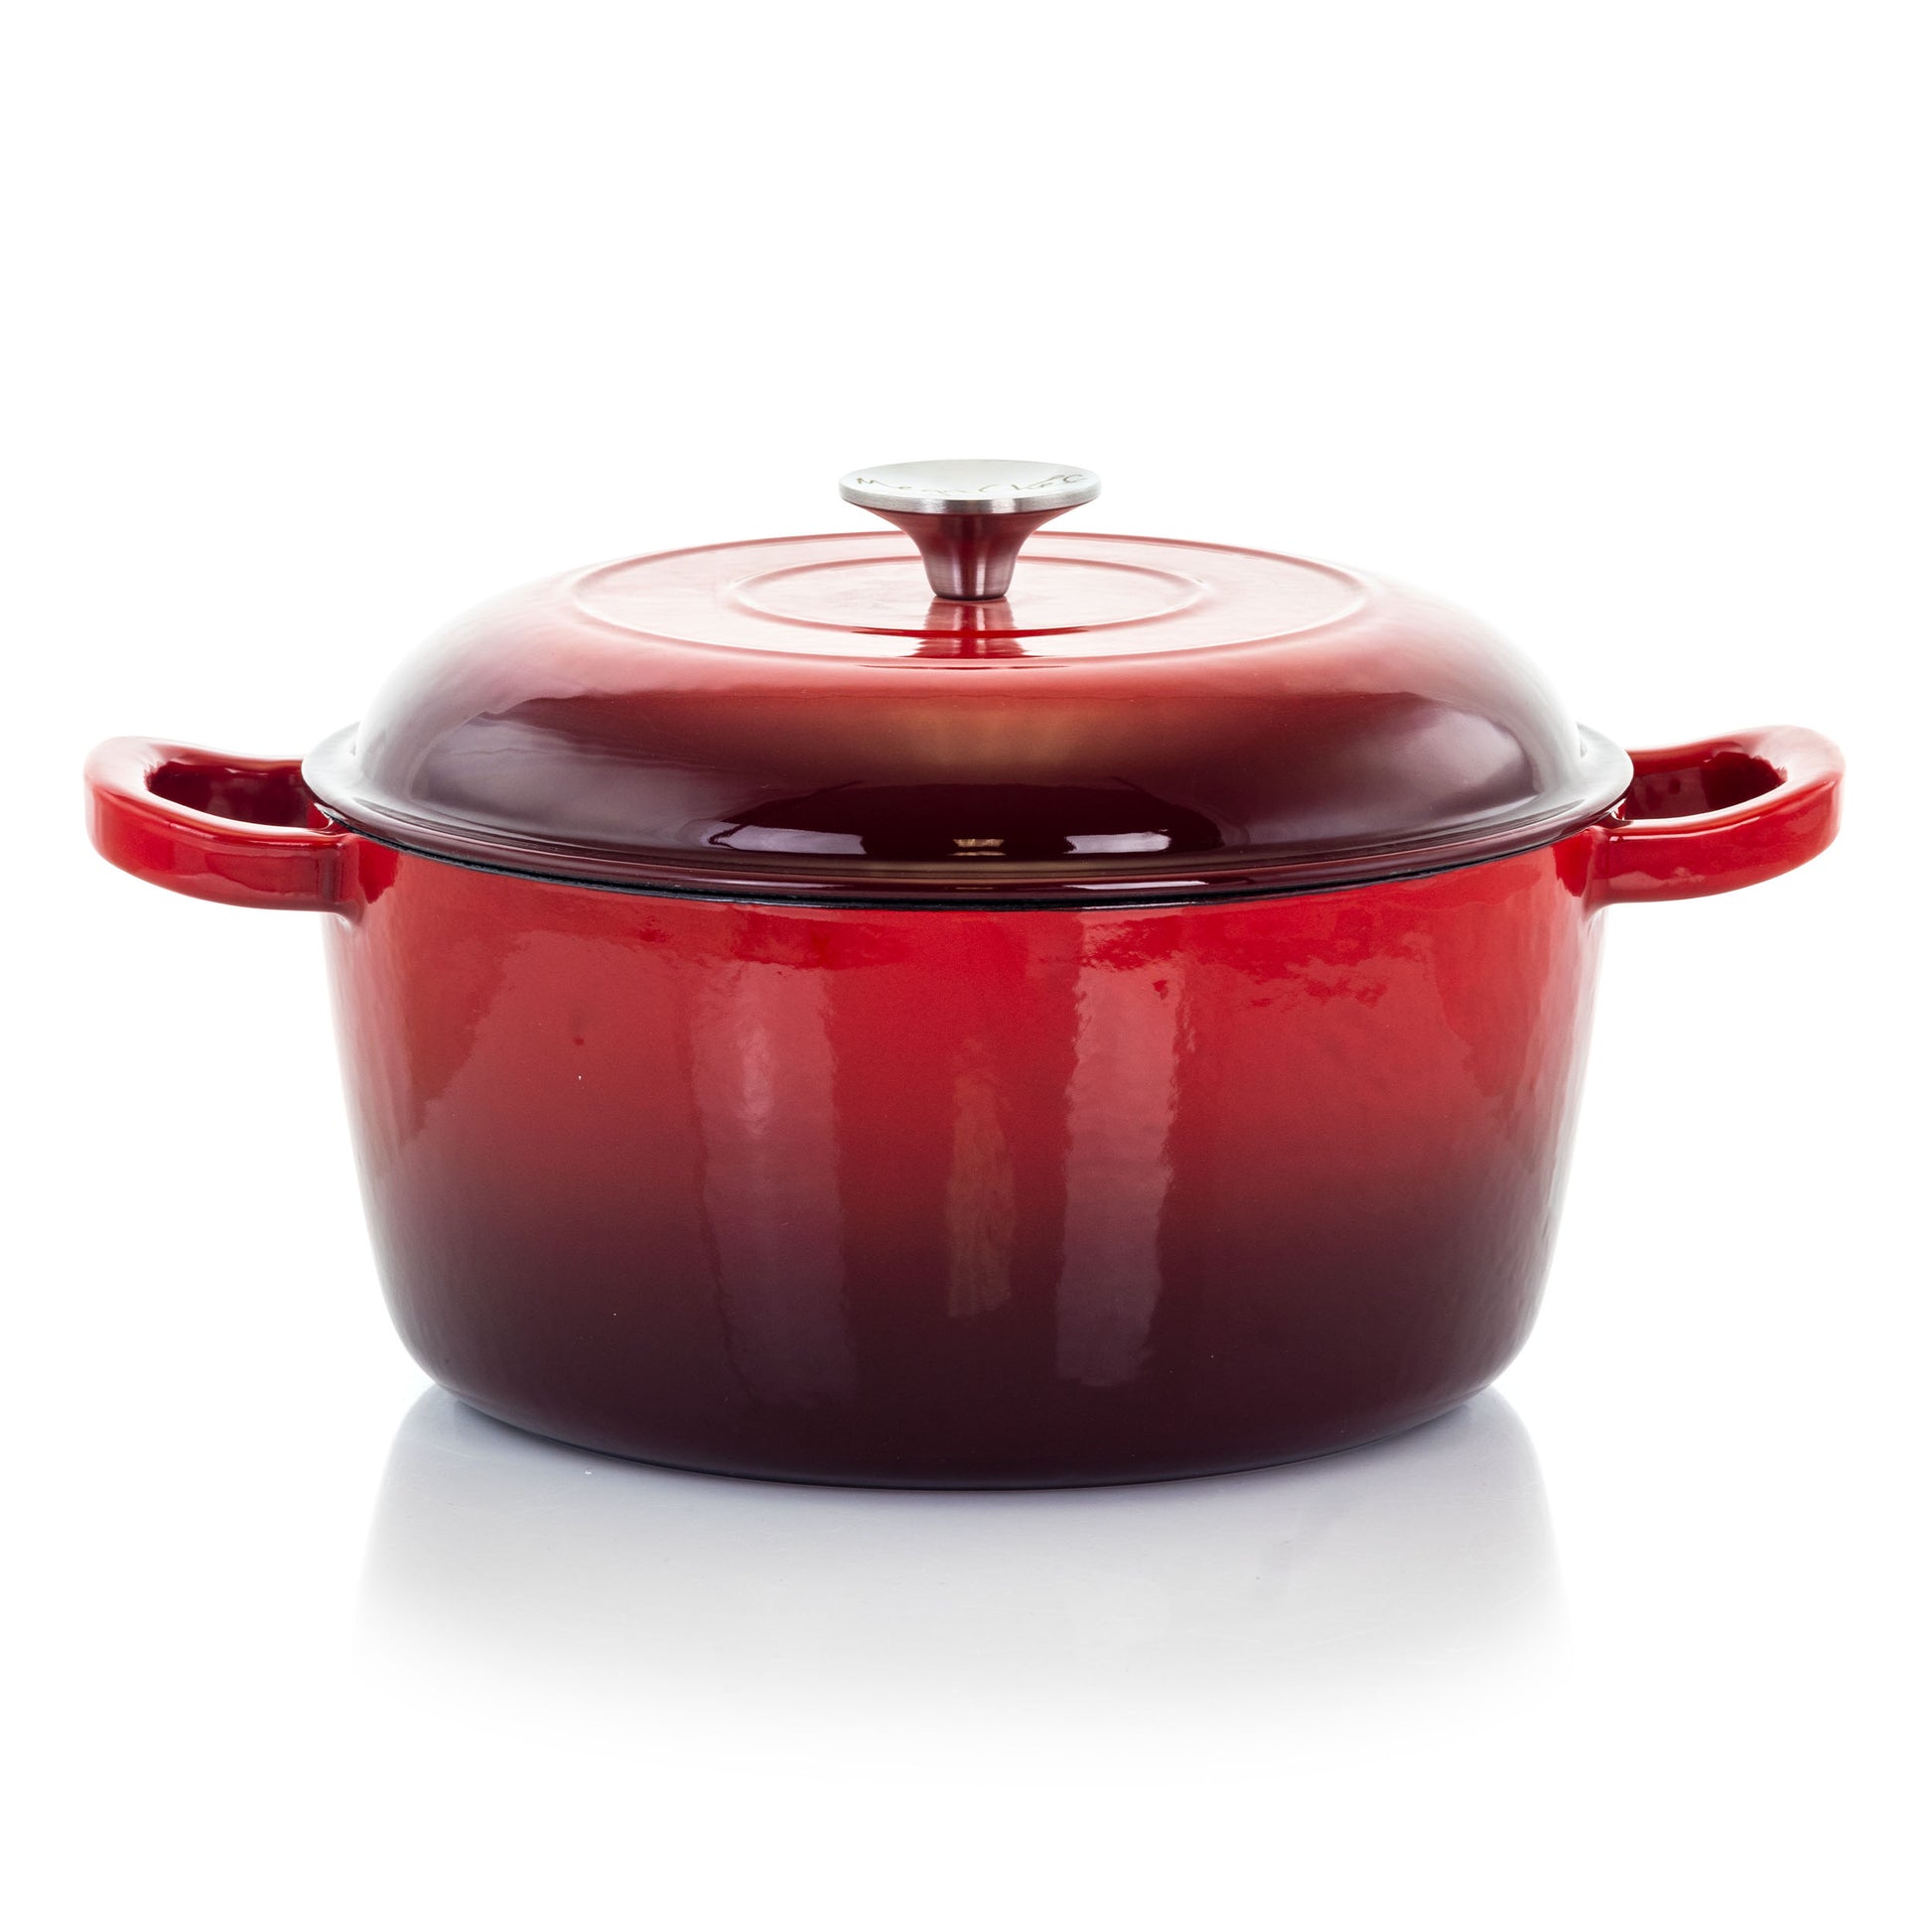 MegaChef MegaChef 5 Quarts Round Enameled Cast Iron Casserole with Lid in Red